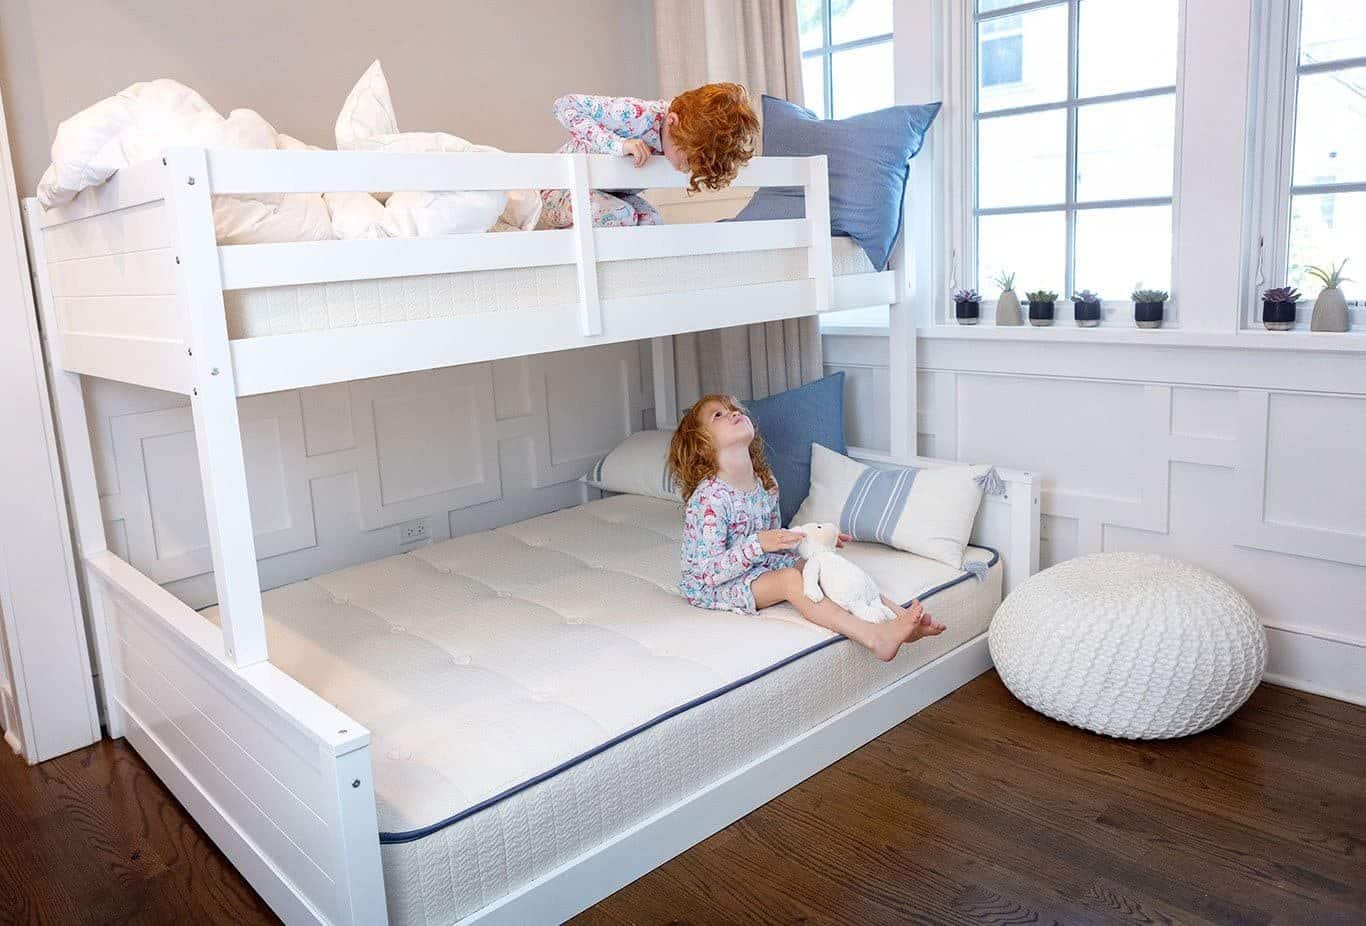 interior view of white bedroom with organic kids' mattresses on bunkbeds; child looks down on sibling on lower bunk, while sib looks back up at him; sunny room with dark wood floor - photo